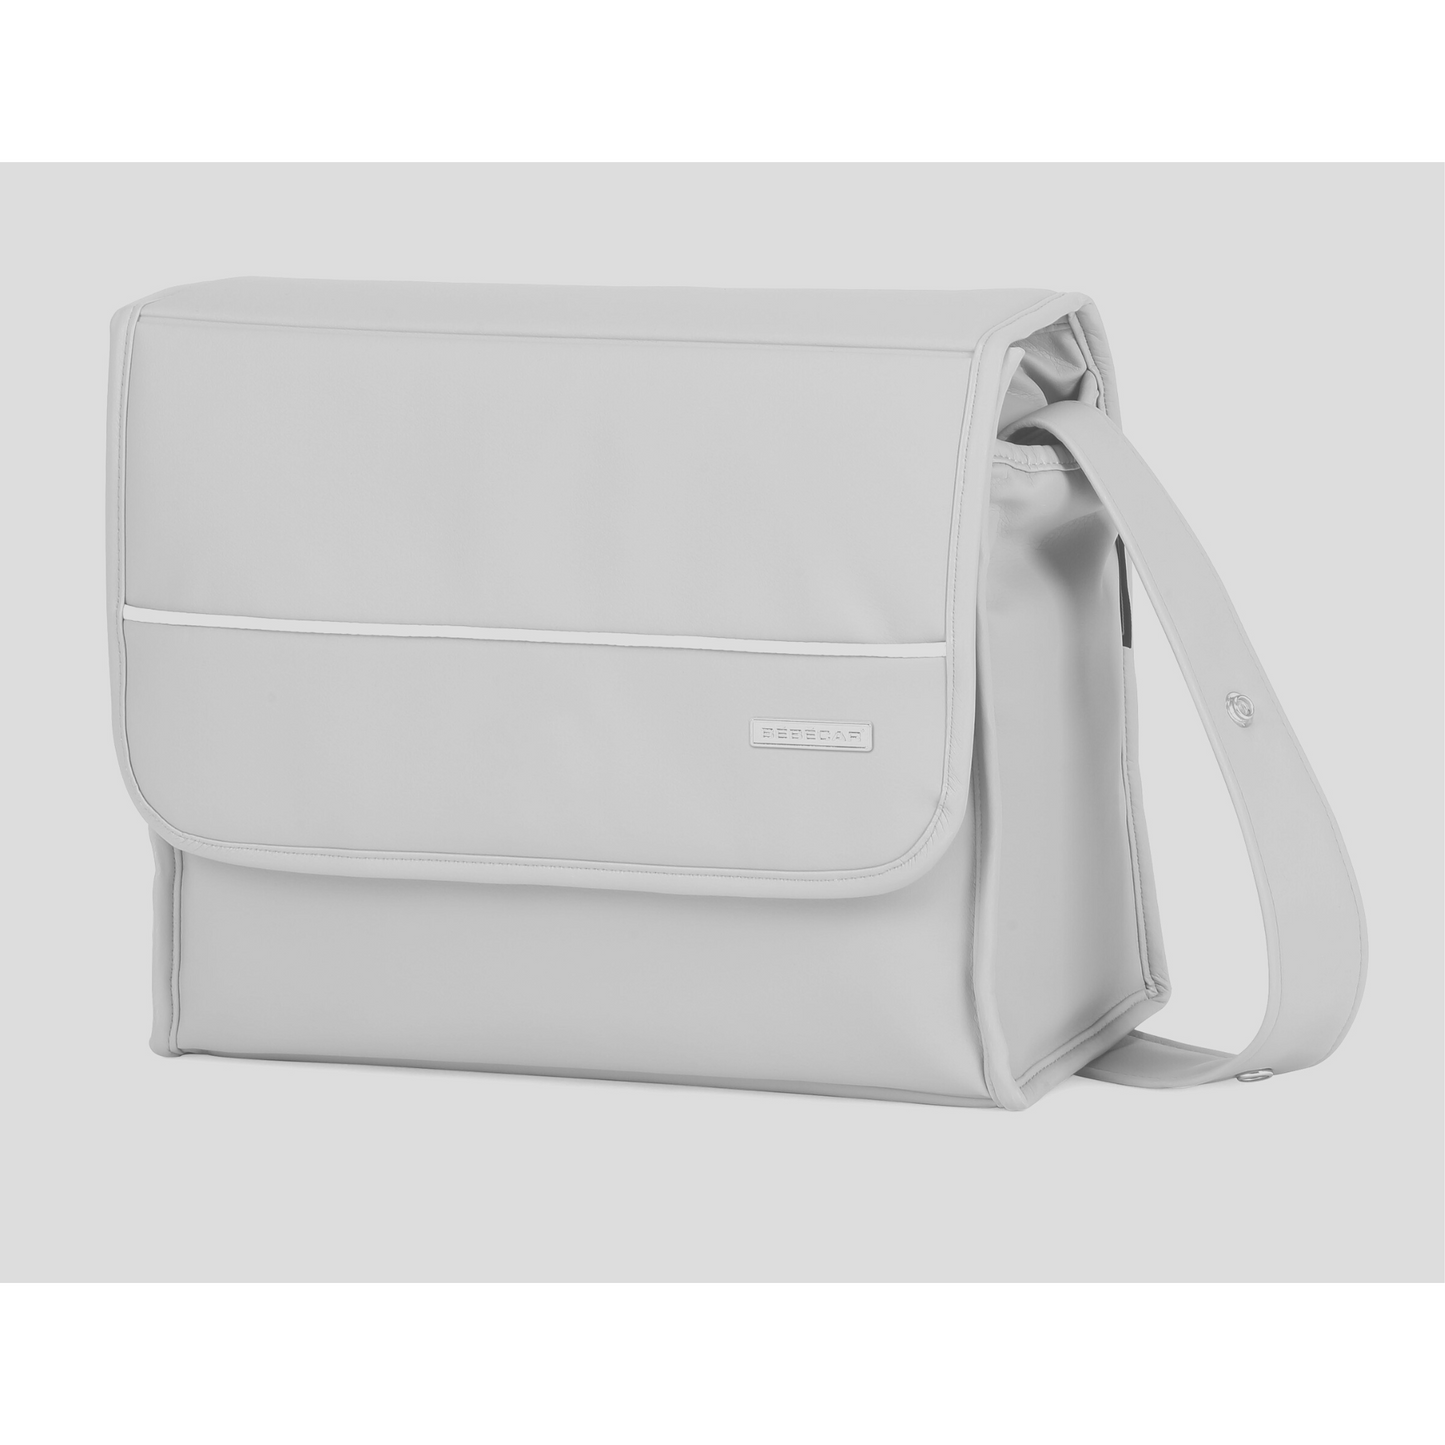 FREE MATCHING Colour Bebecar Changing Bag Carre (Square)